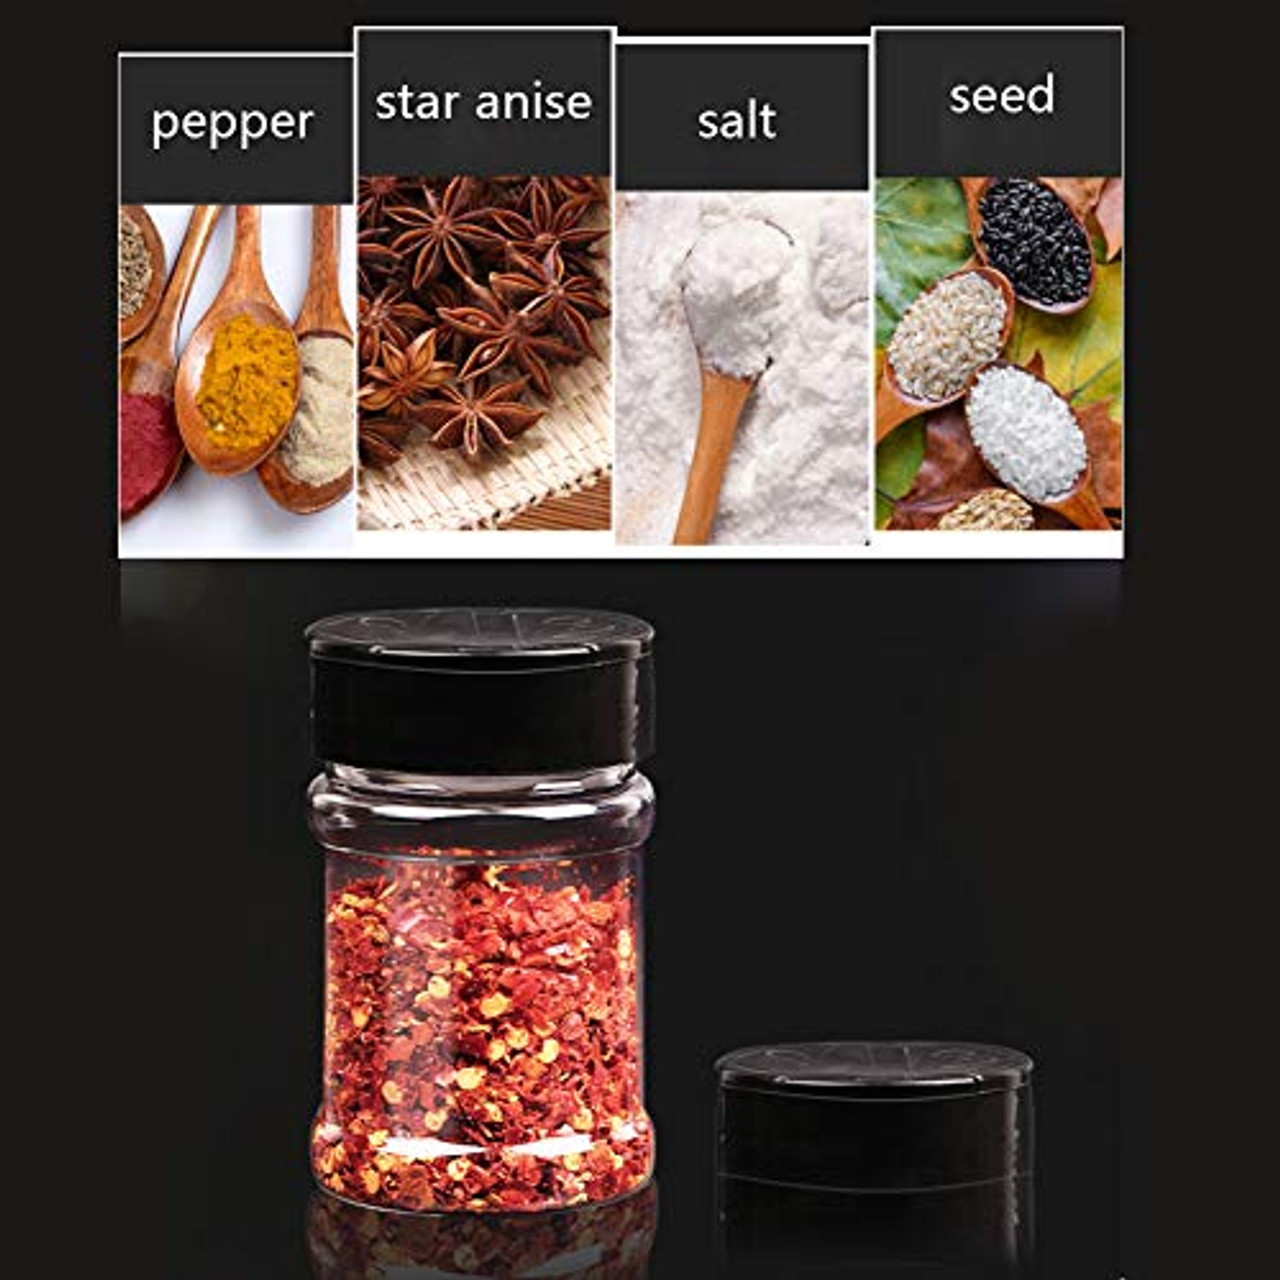 16 Pack 3.5 oz Plastic Spice Jars,Empty Seasoning Bottles Containers with  Shaker Lids for Storing Spice,Salt,Herbs,Powder